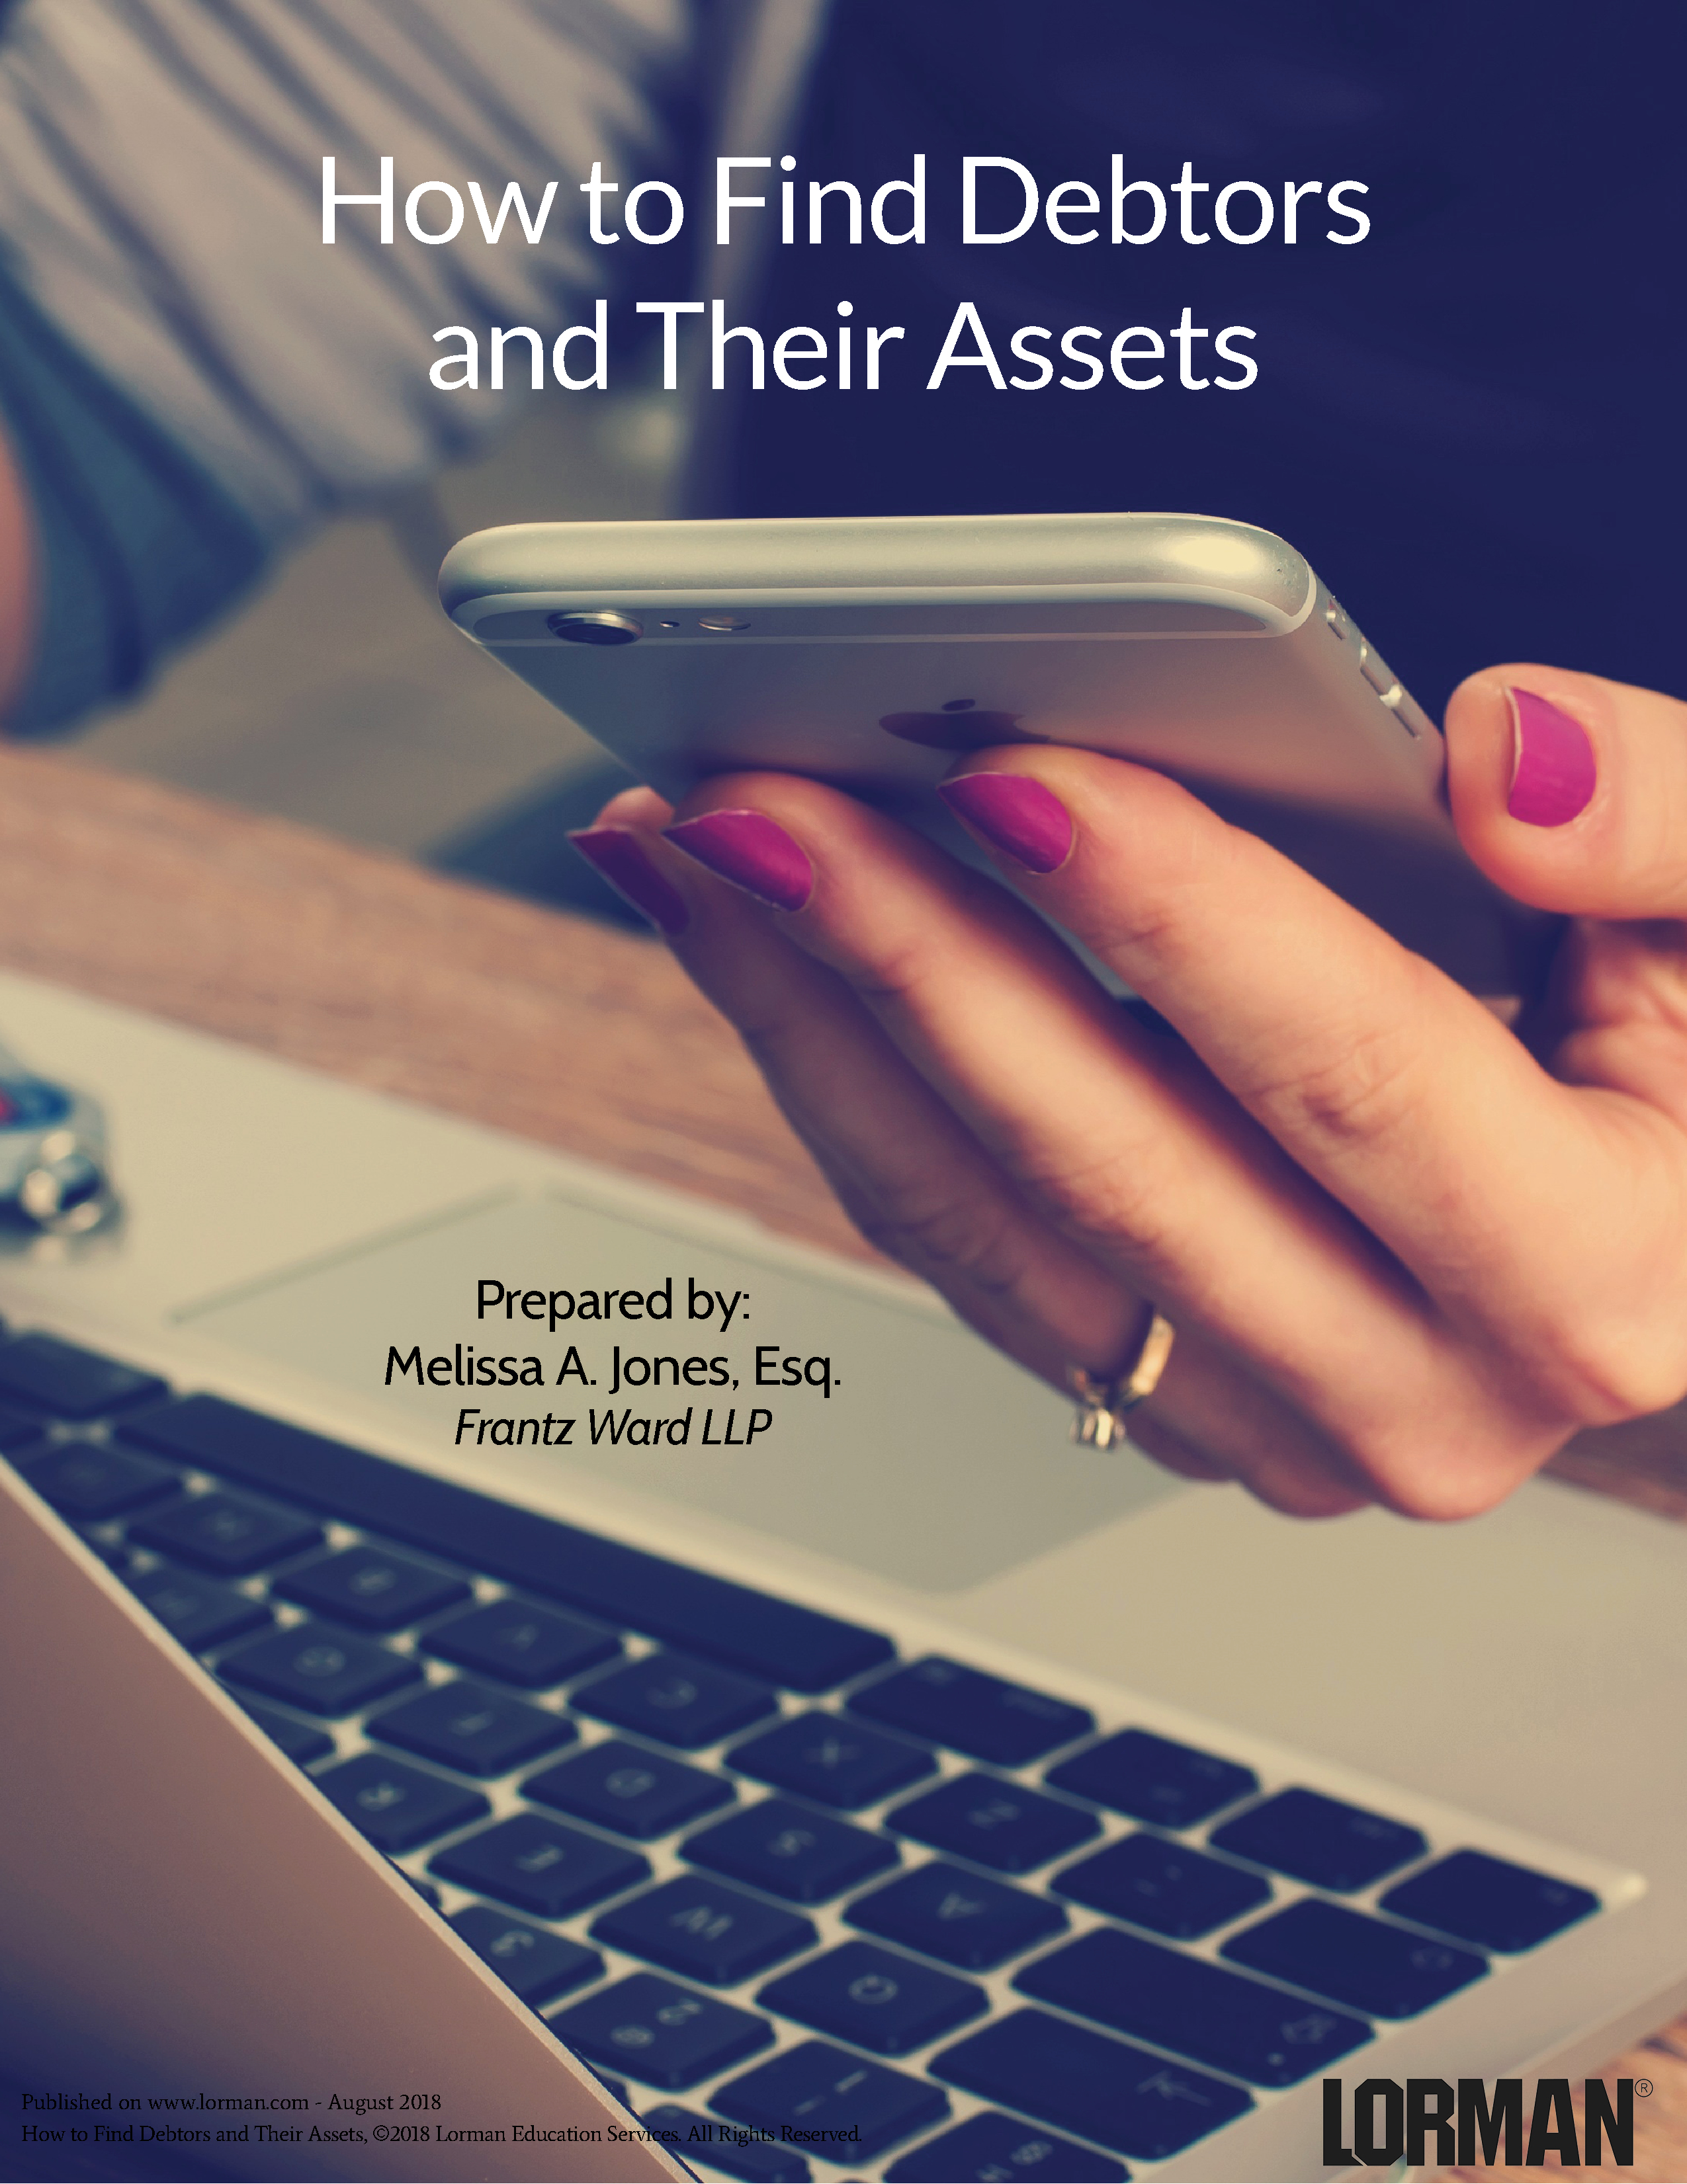 How to Find Debtors and Their Assets